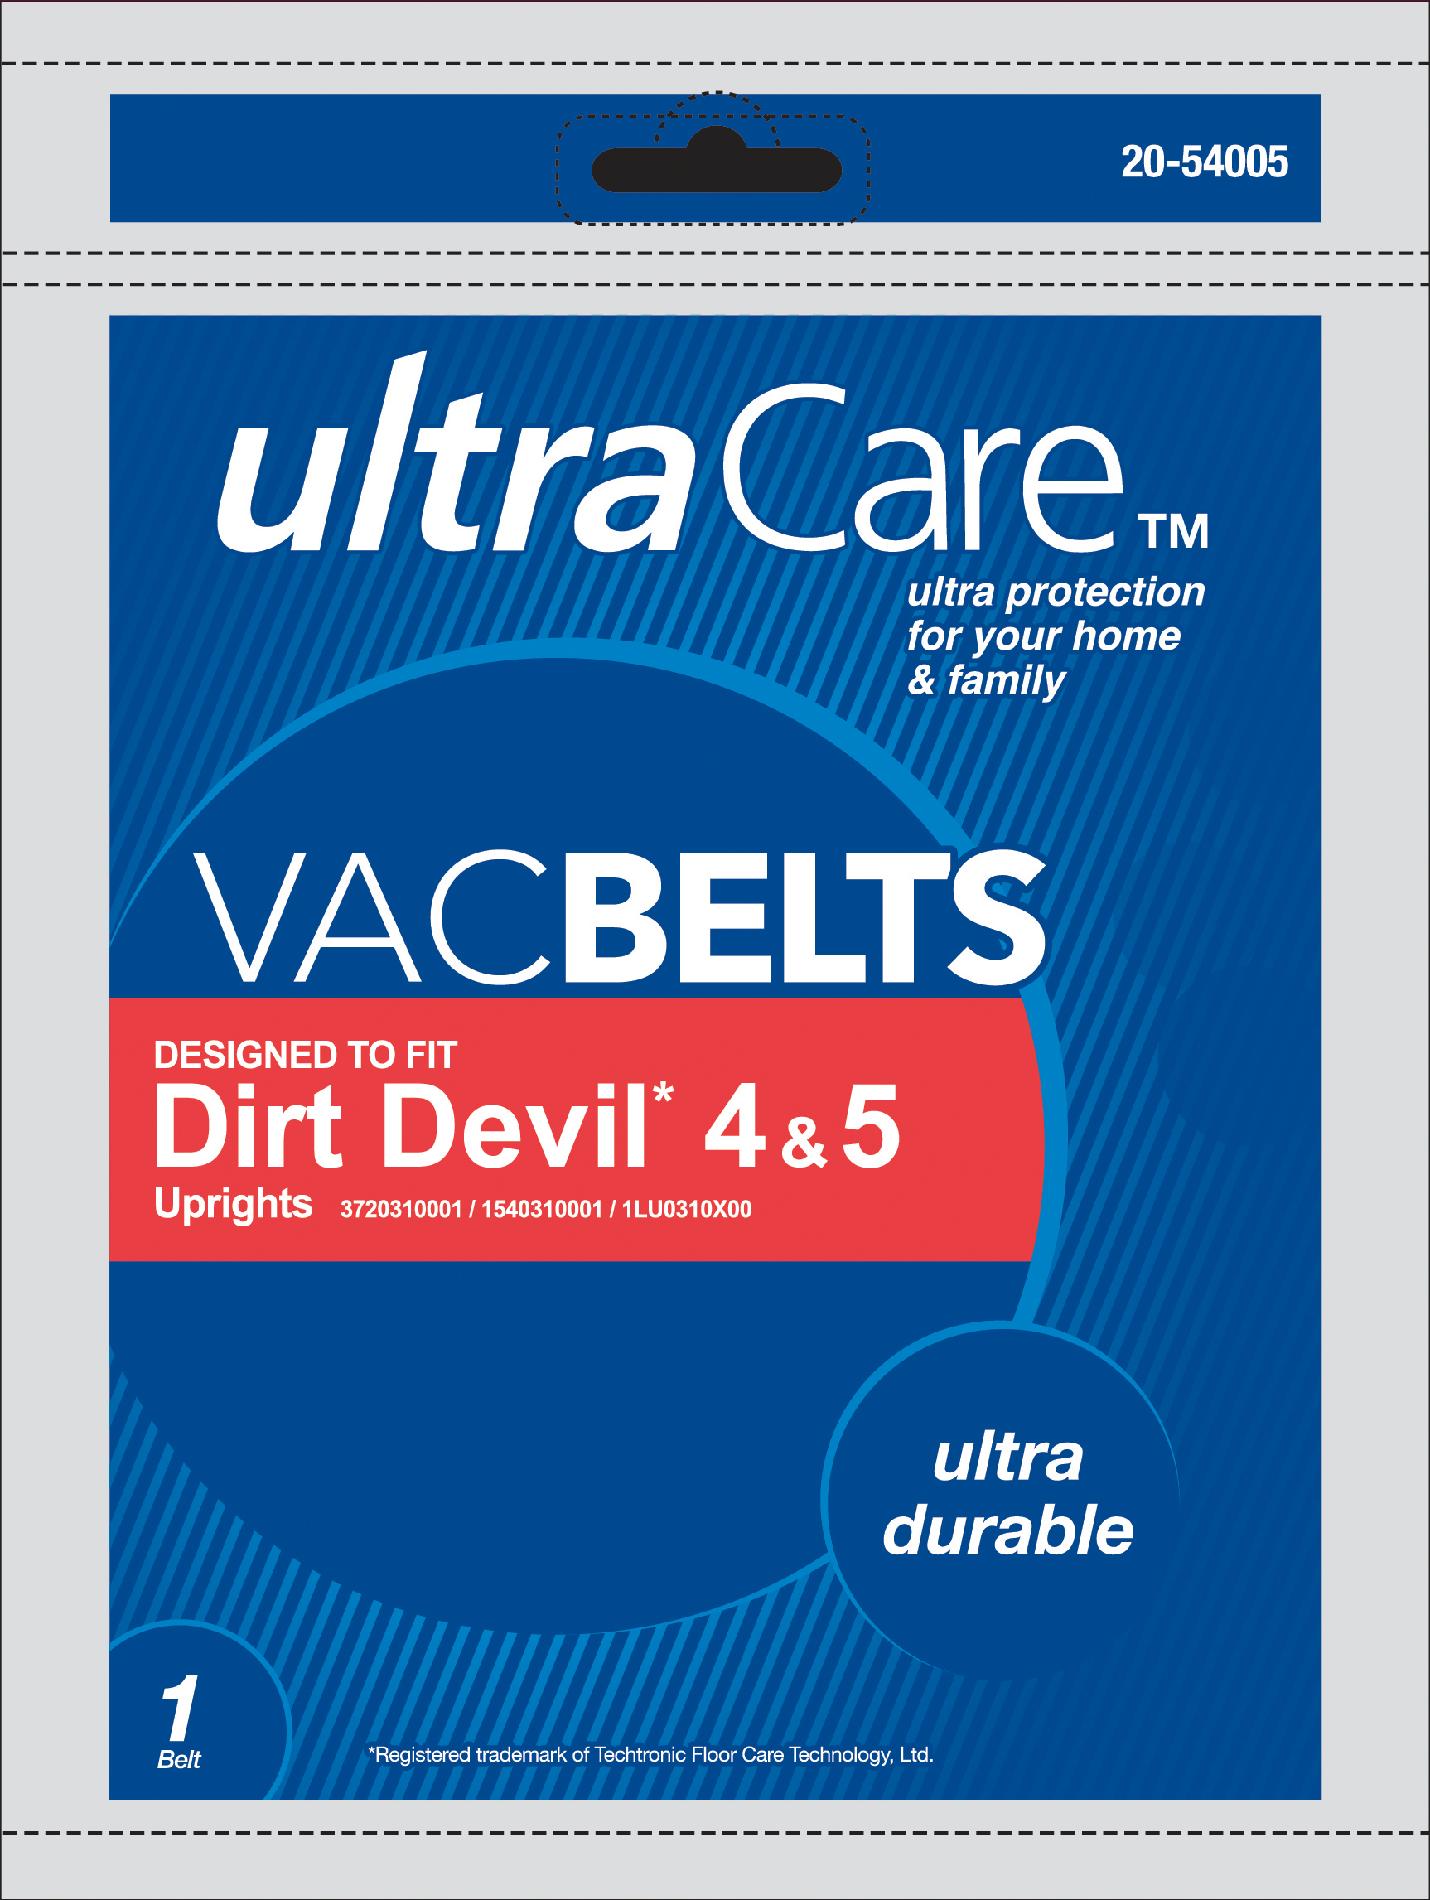 UltraCare UCB5045-6 VacBelts for Dirt Devil 4 & 5 Upright Vacuums